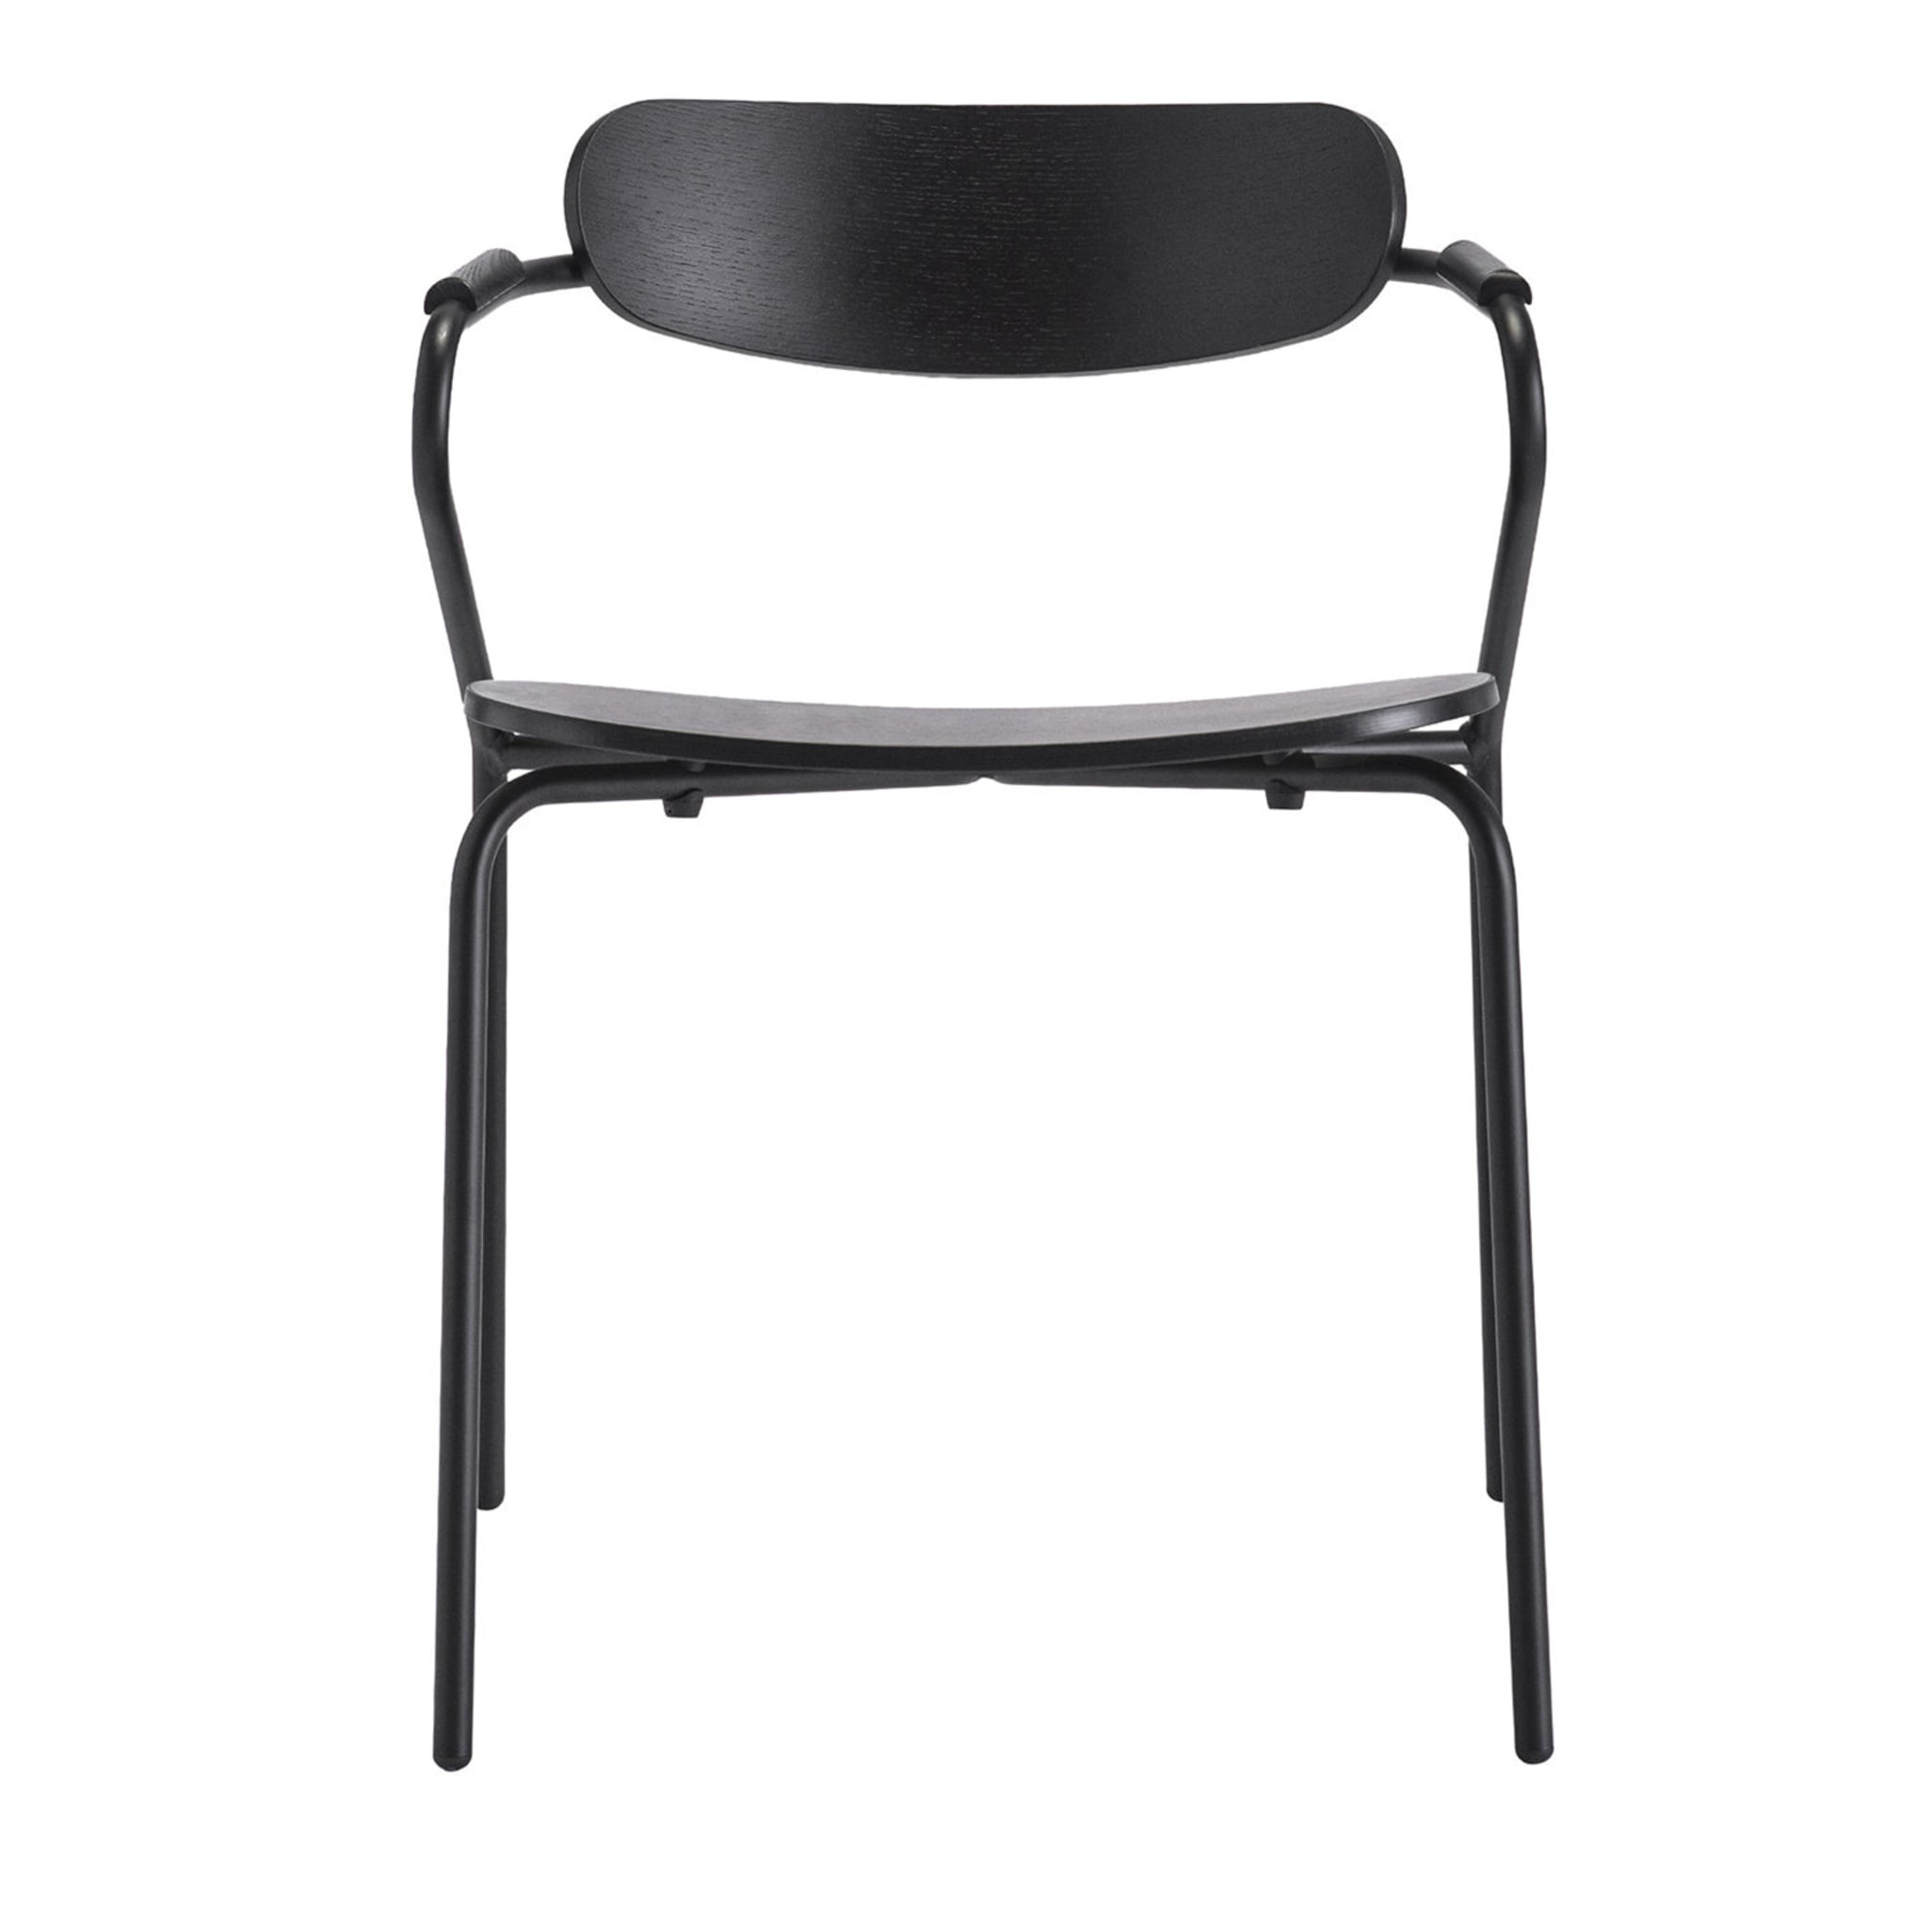 Linea Black Chair with Armrests - Main view